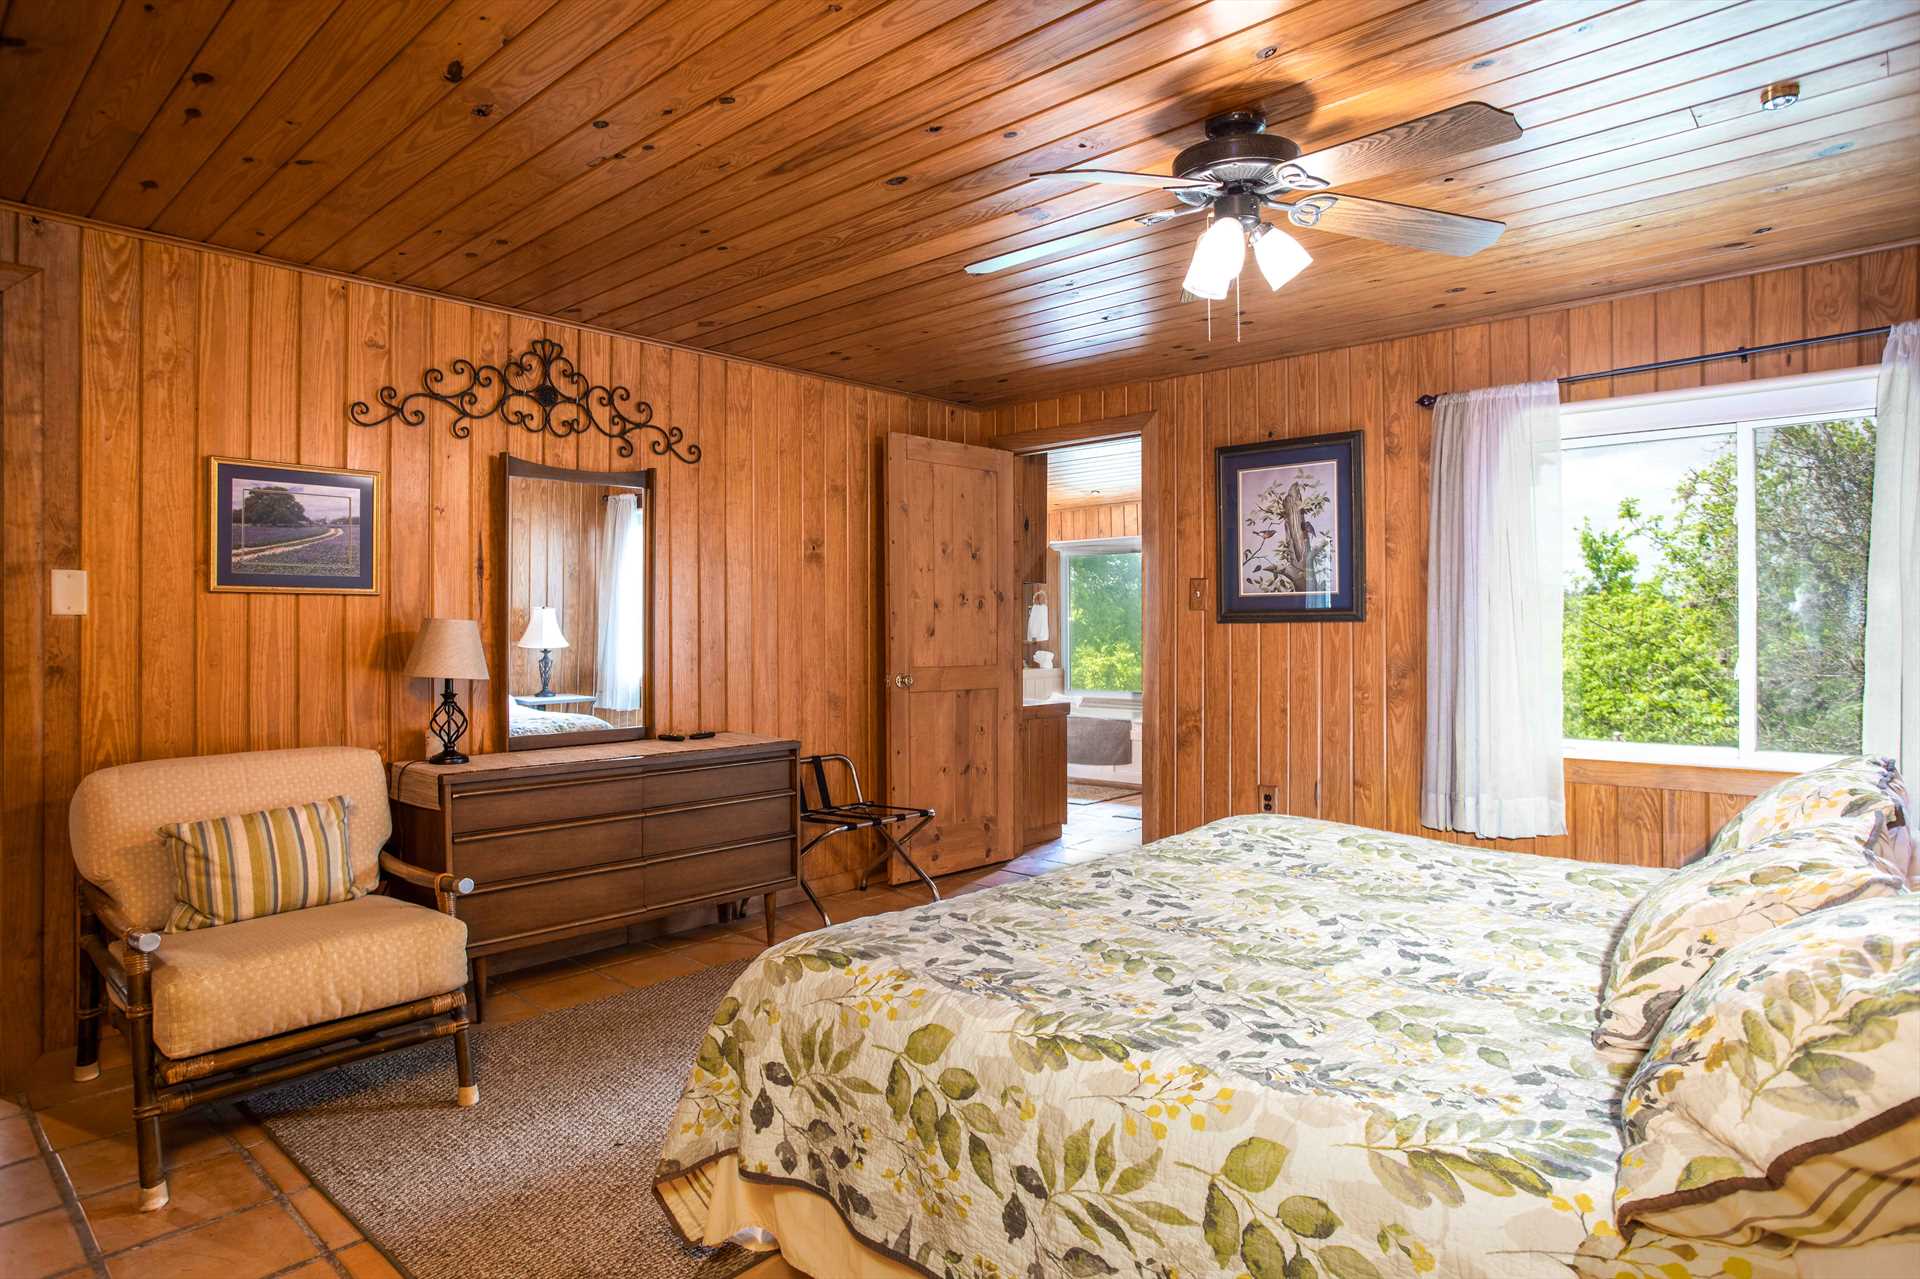                                                 Warm, clean, and tasteful bed linens are provided for all six beds at the River Ridge Bandera Cabin.